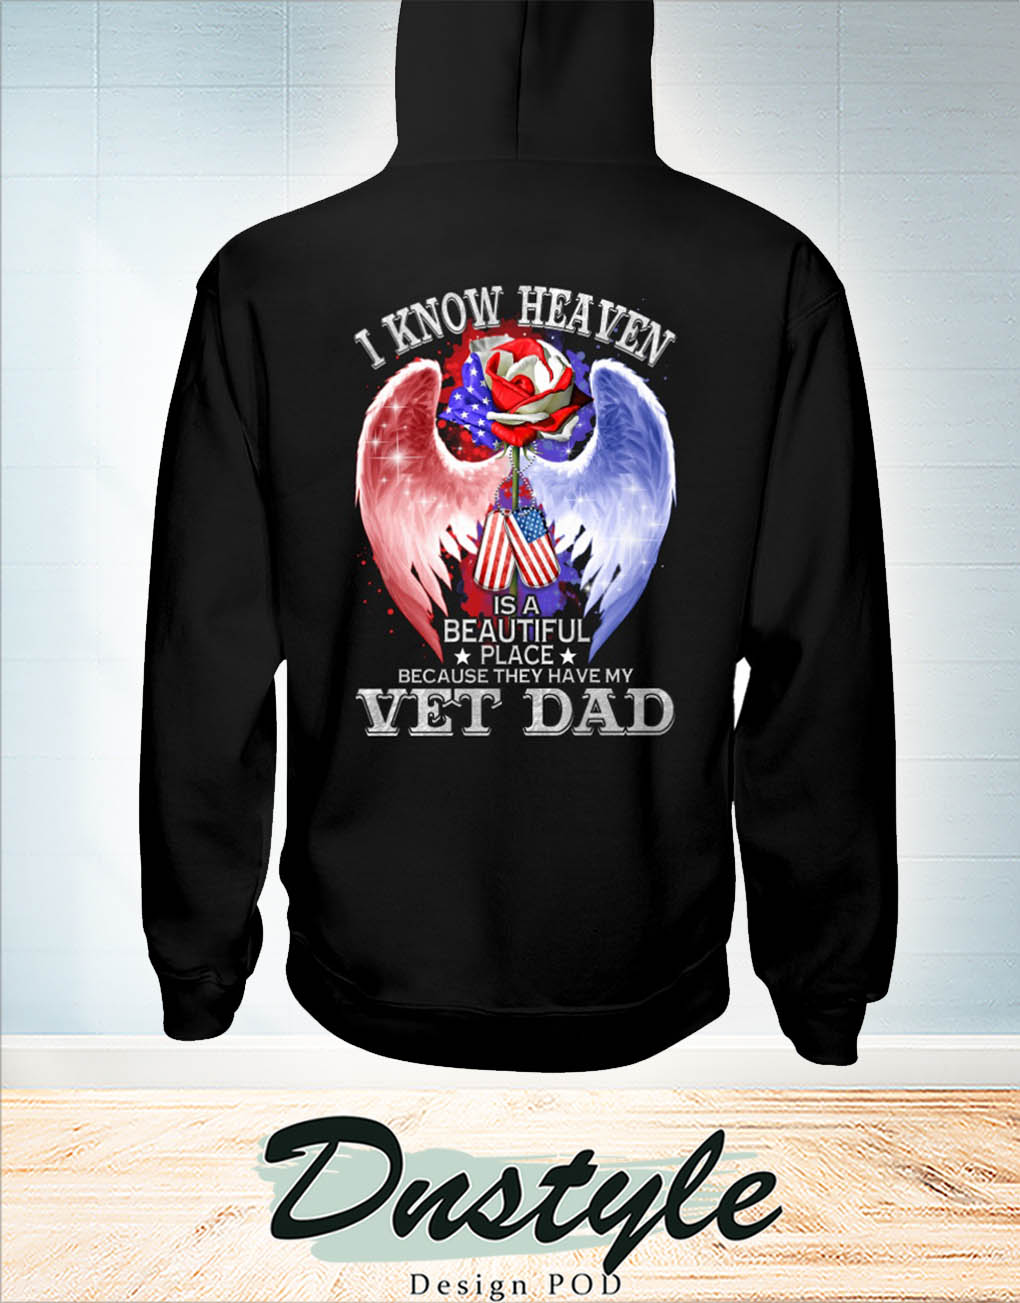 I know heaven is a beautiful place because they have my vet dad hoodie